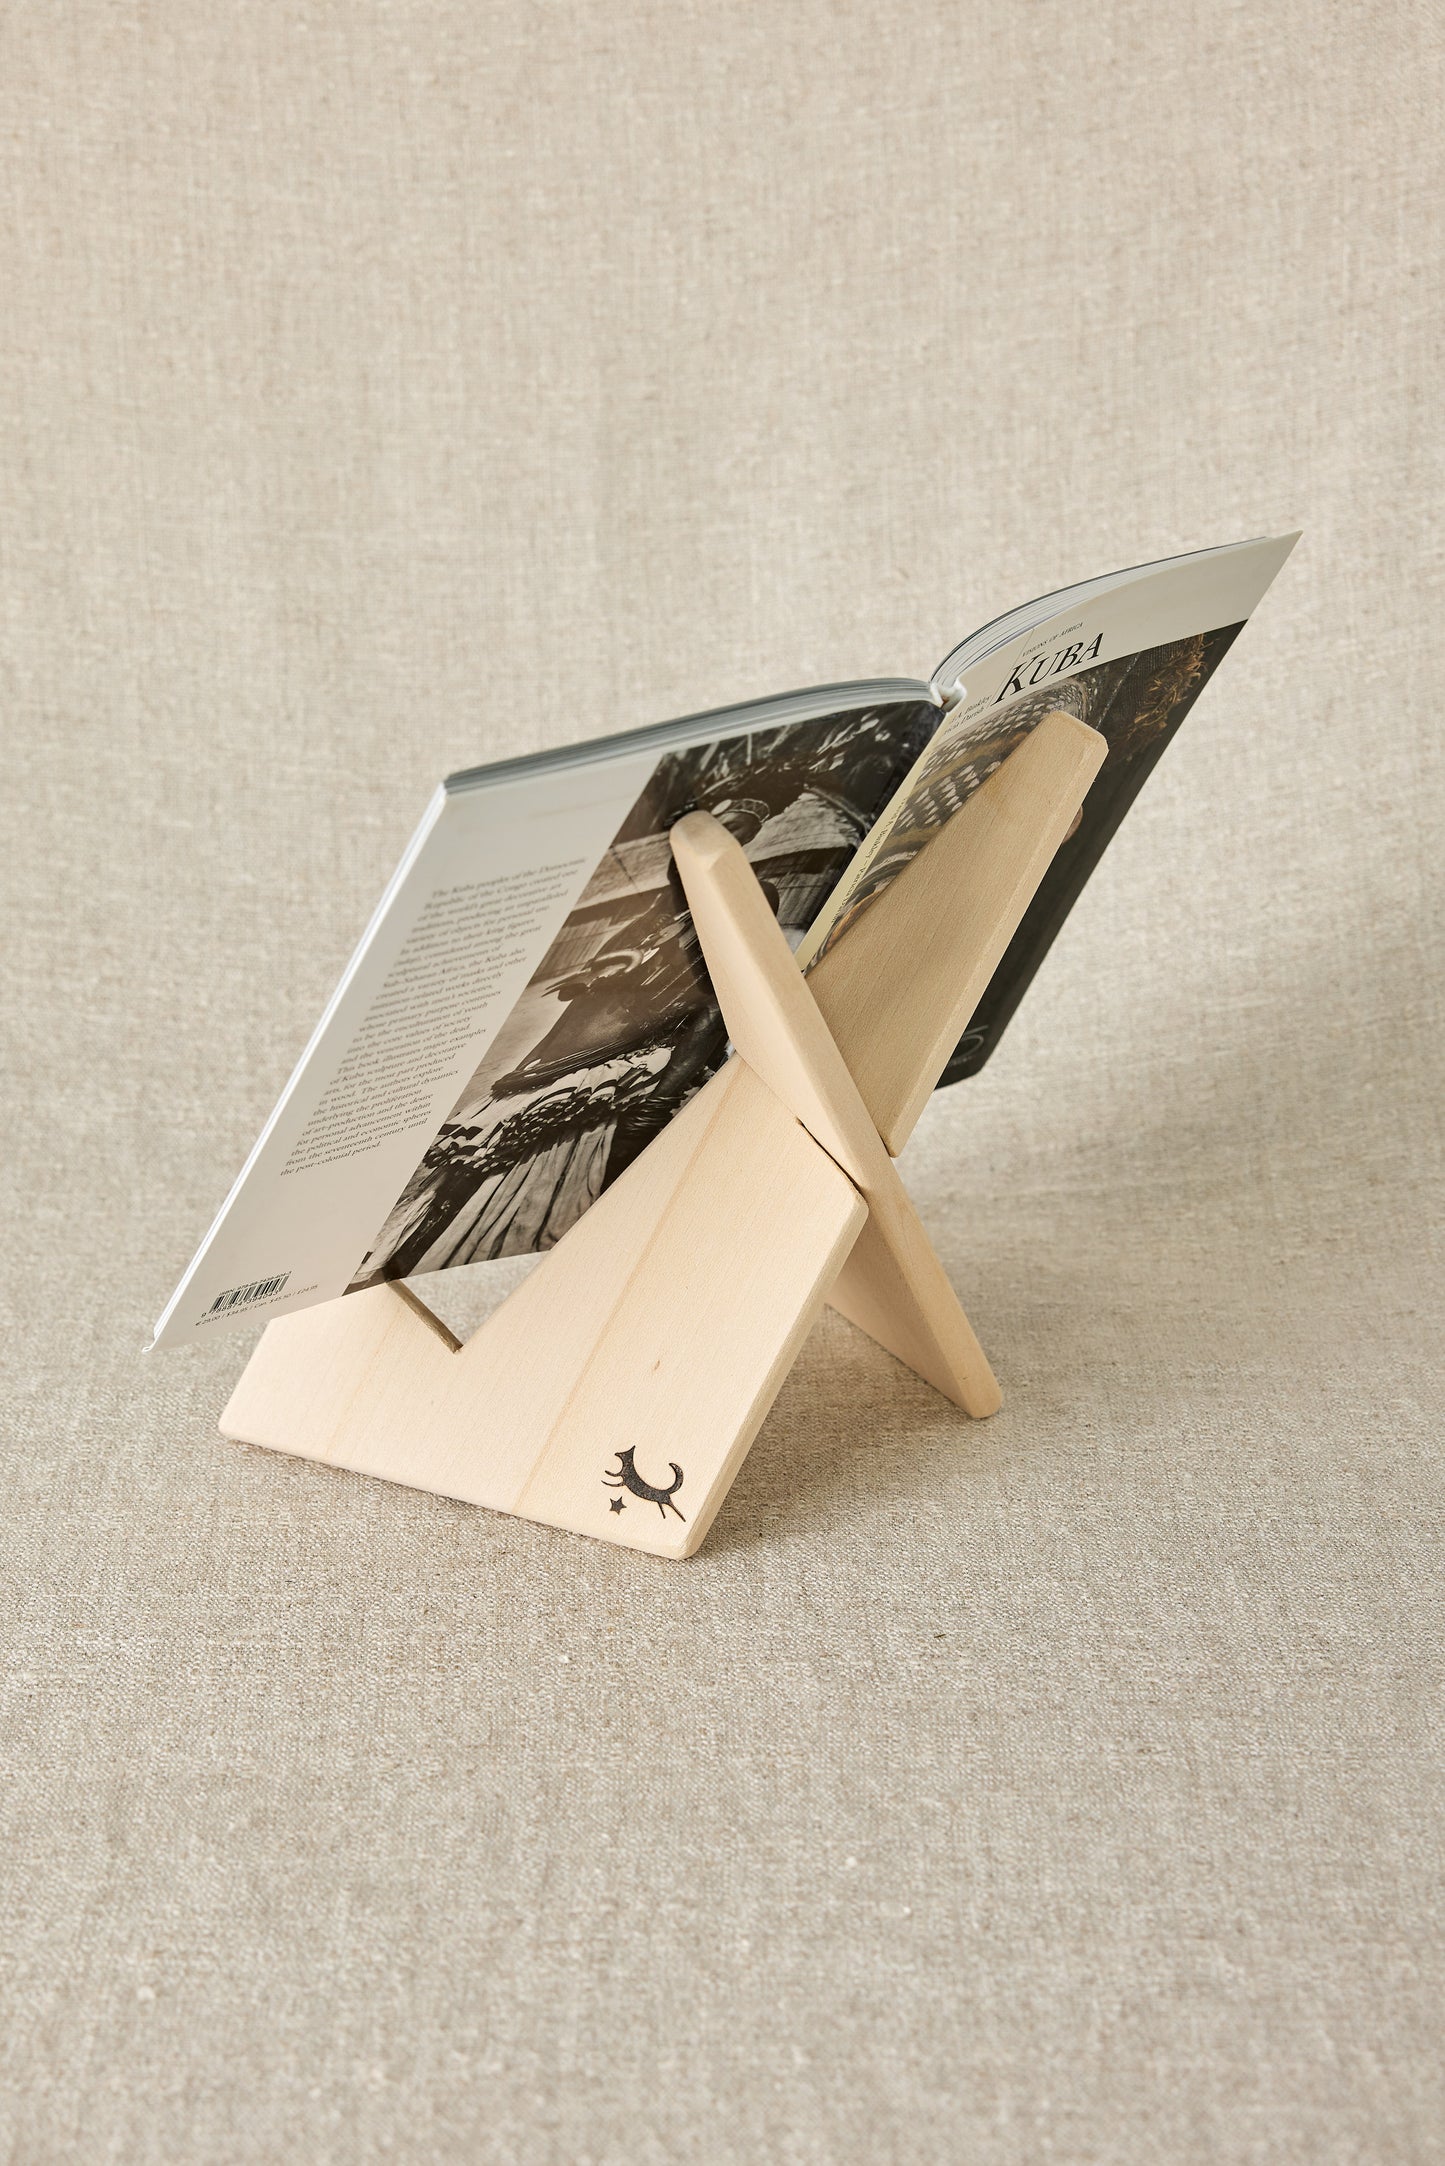 Expandable Book or Tablet Holder